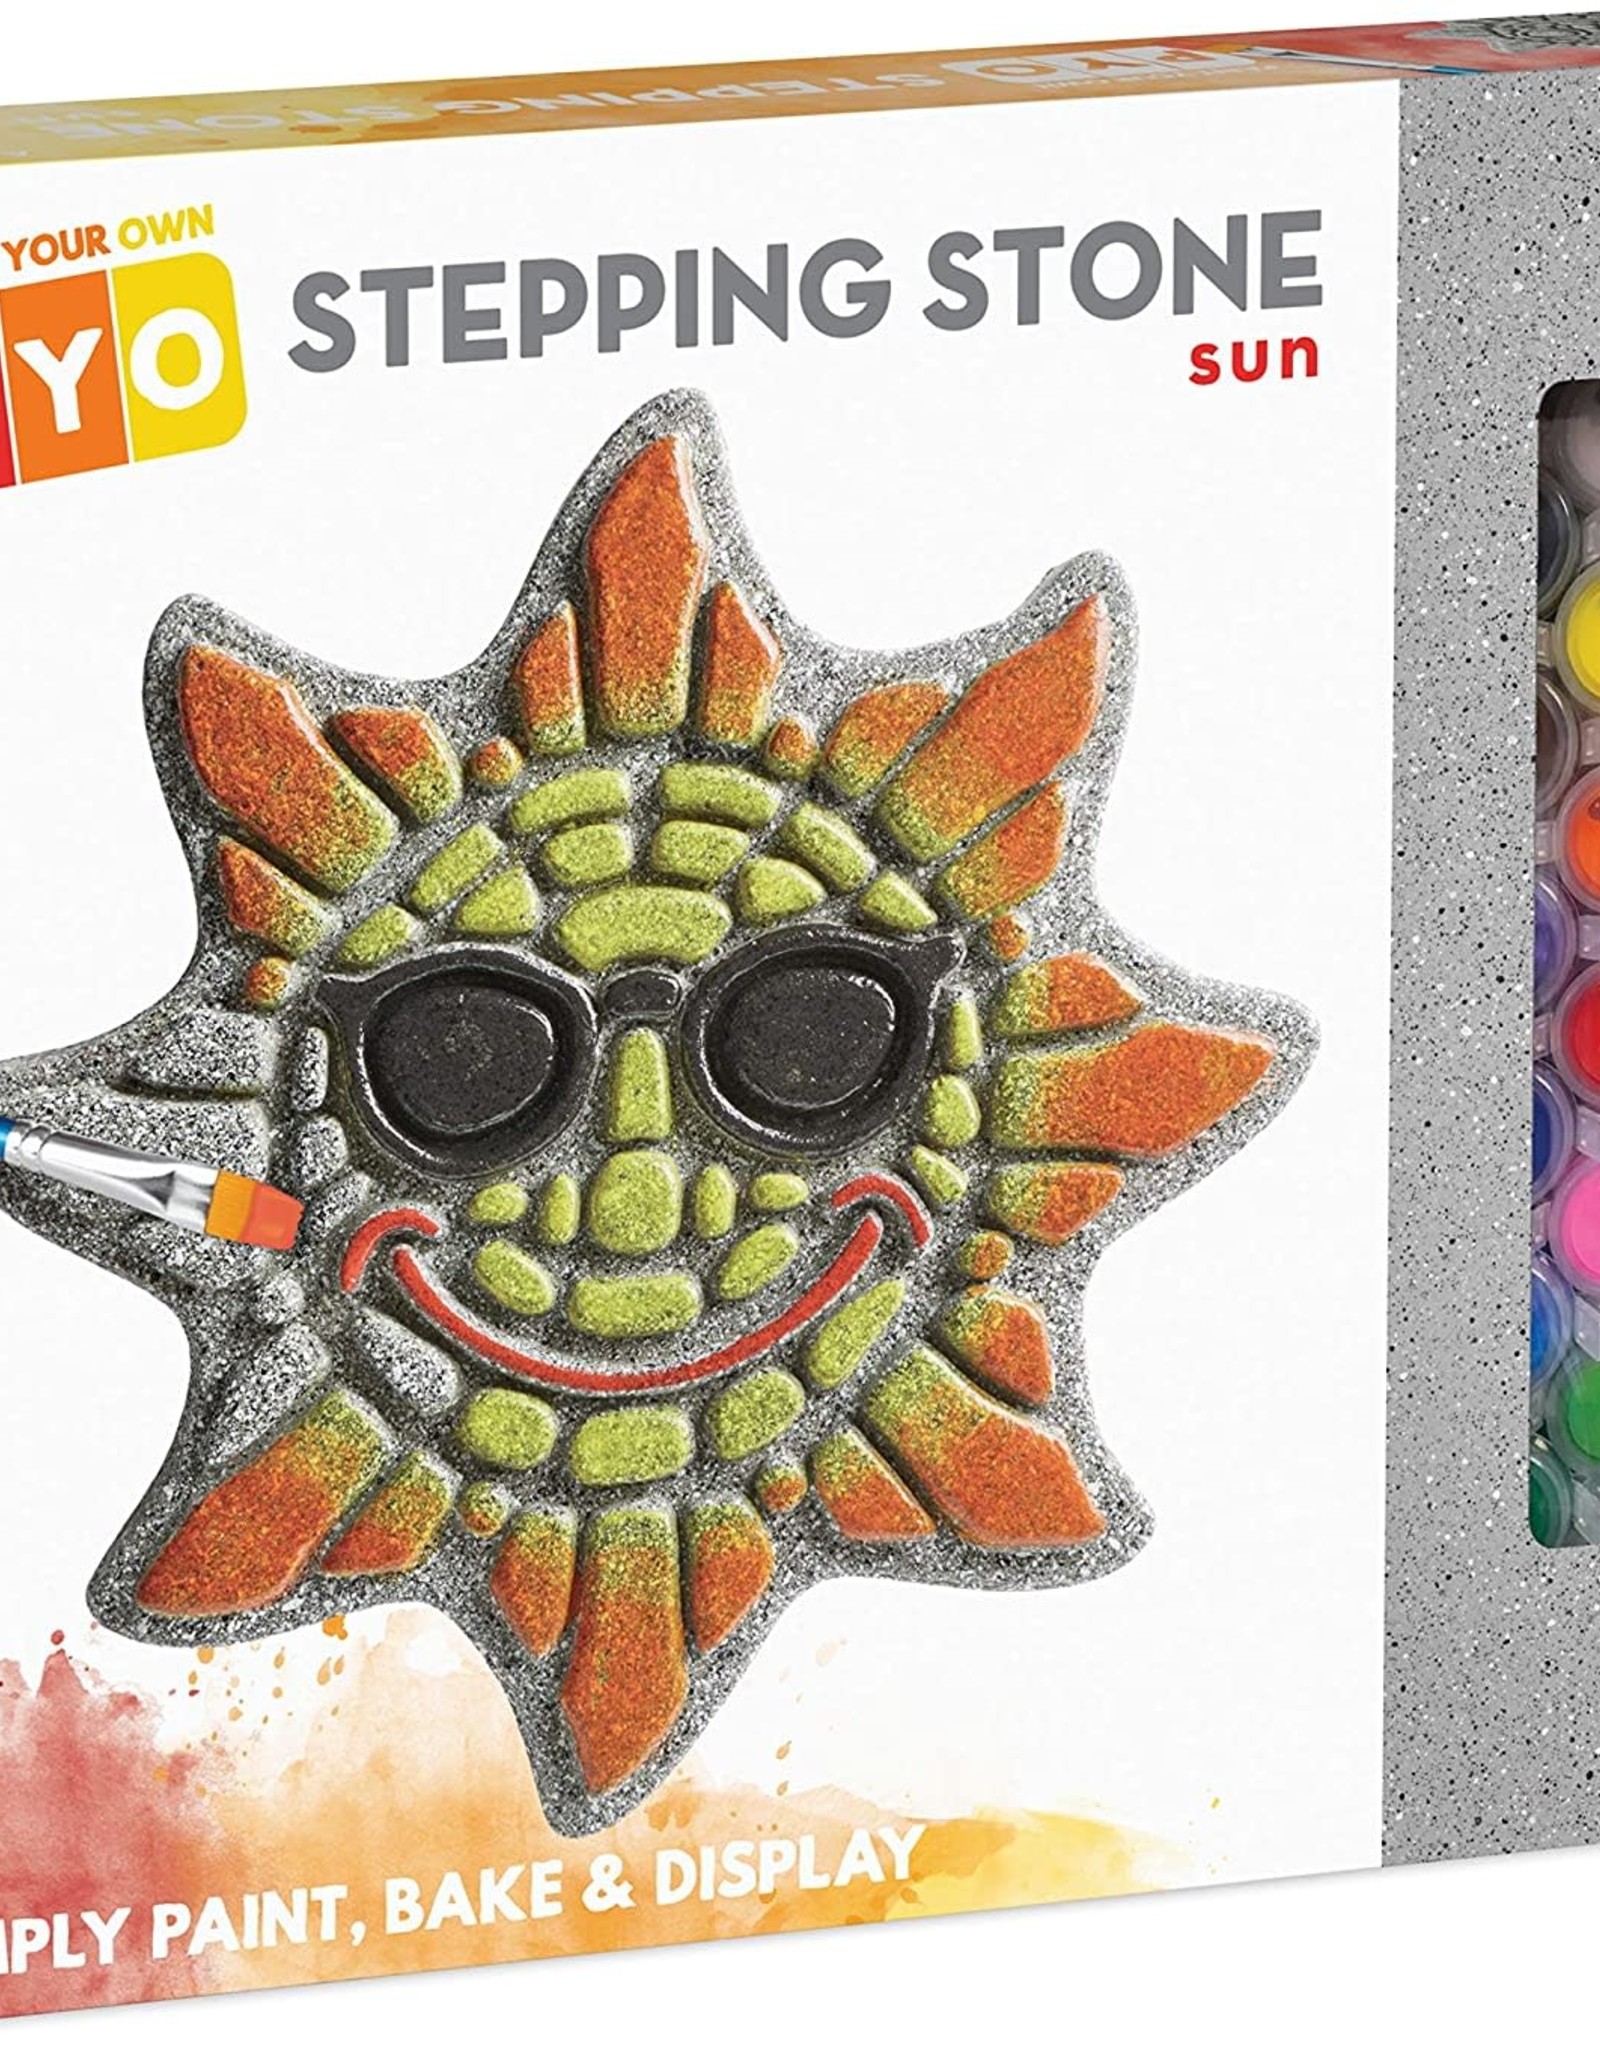 Paint Your Own Stepping Stone Sun